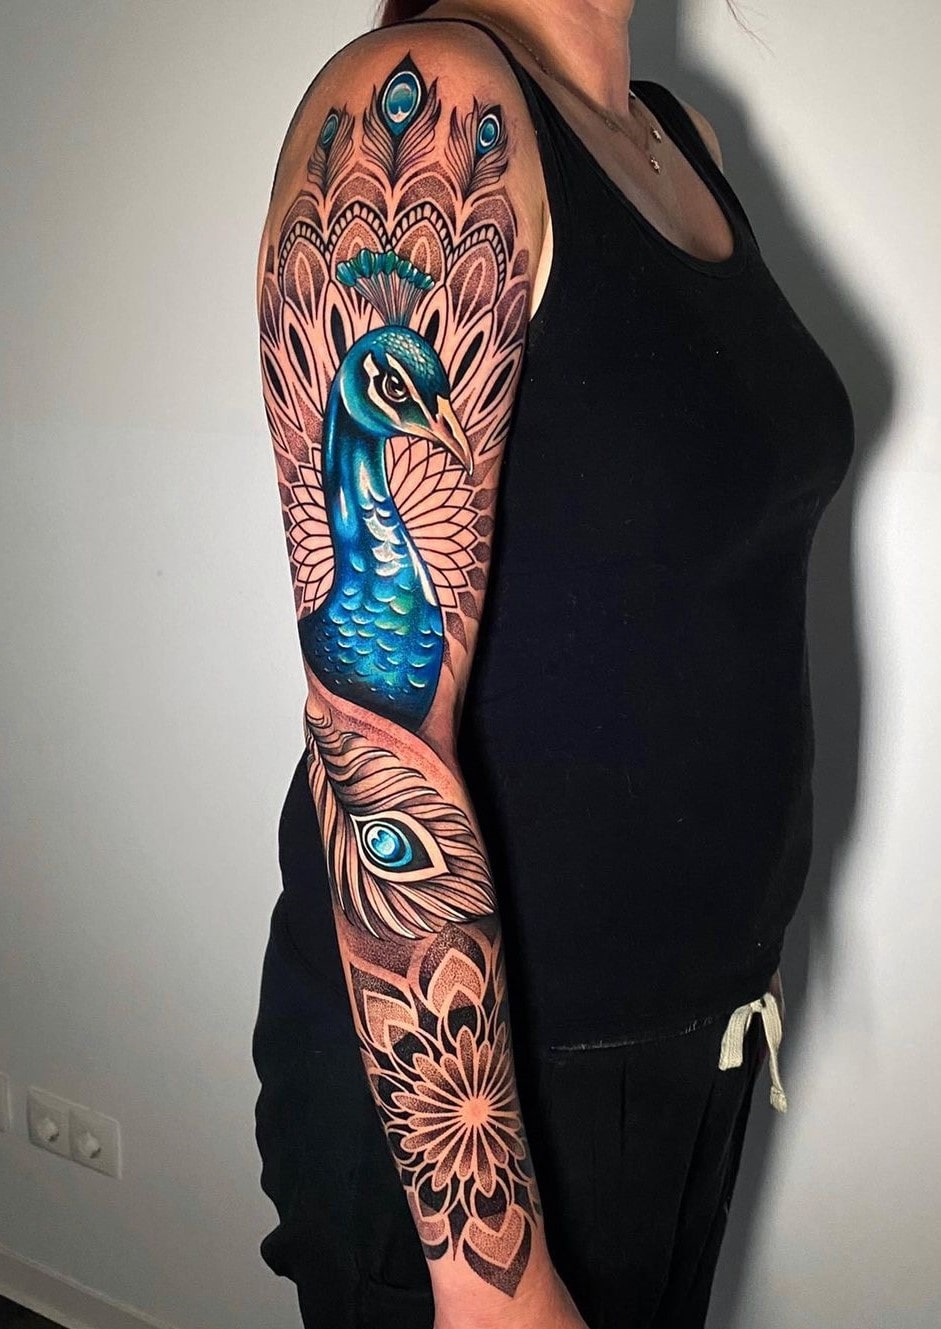 40+ Best Peacock Feather Tattoo On Hand Designs - 91tattoos